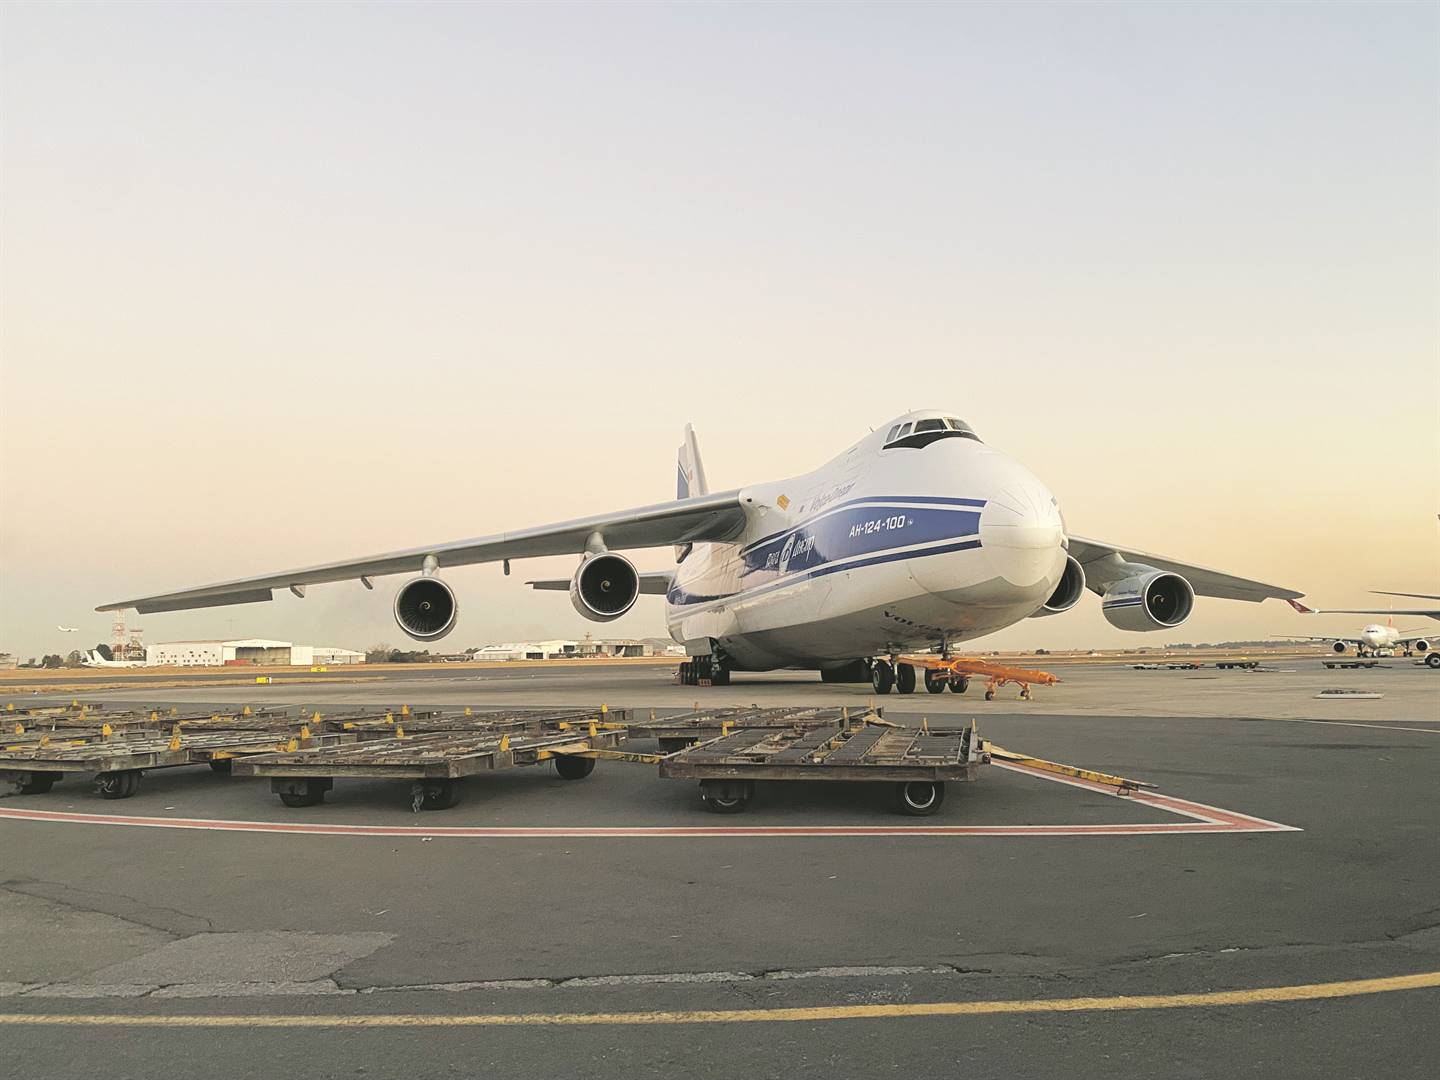 The Antonov AN124 cargo plane registered in Russia was stranded at OR Tambo International Airport this week after the fuel suppliers at the airport refused to refuel it for the flight back to Russia. Photo: André de Beer